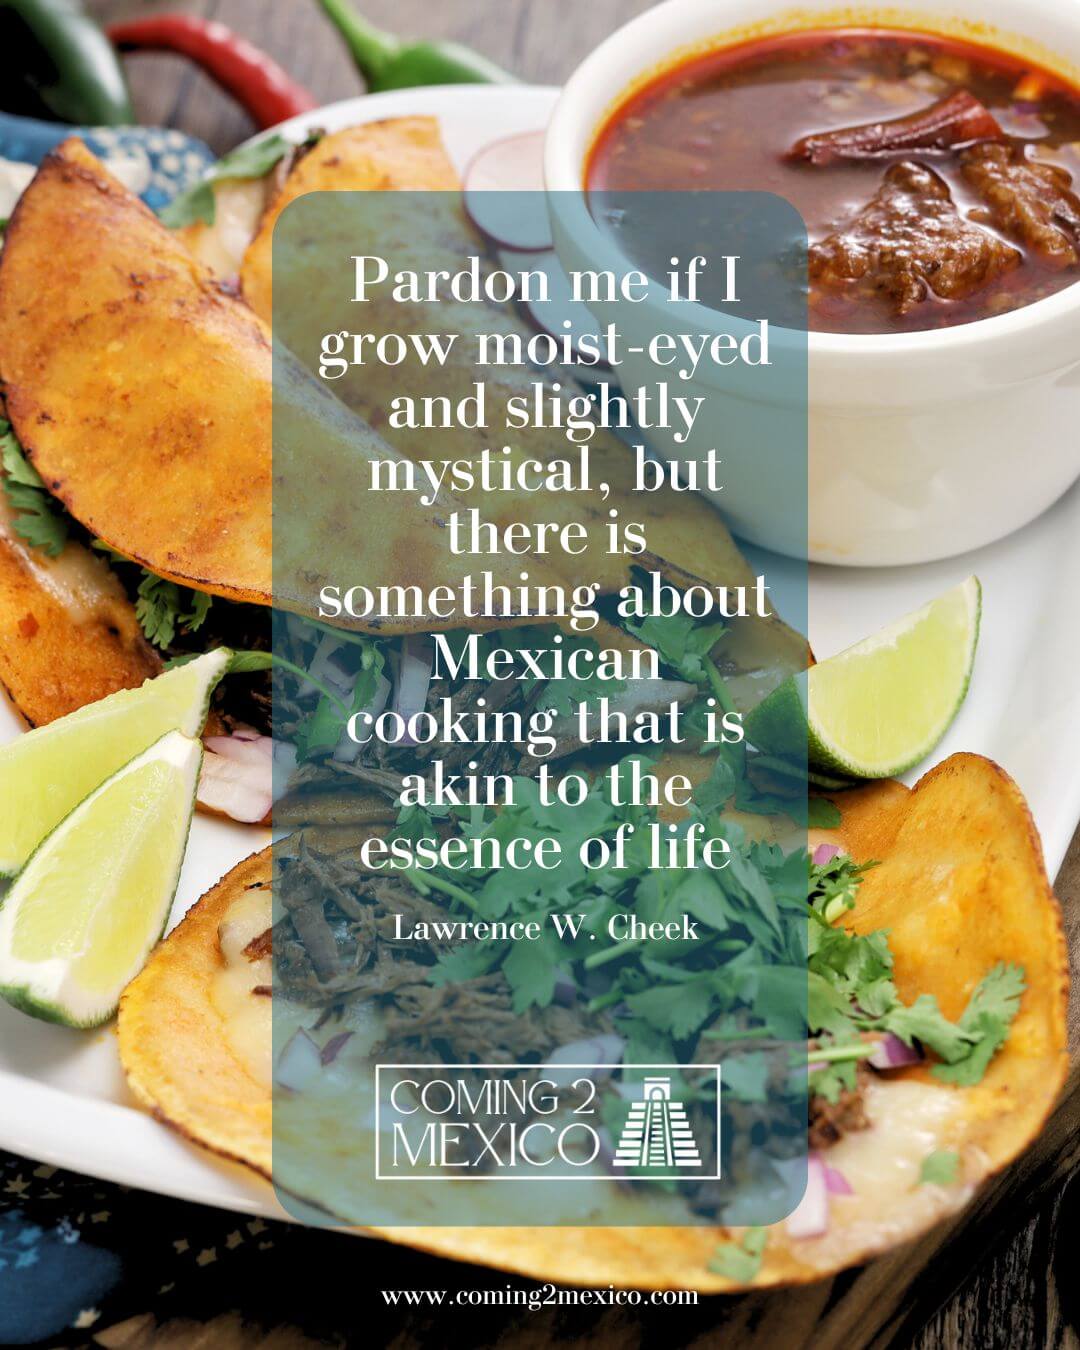 "Pardon me if I grow moist-eyed and slightly mystical, but there is something about Mexican cooking that is akin to the essence of life." Lawrence W. Cheek